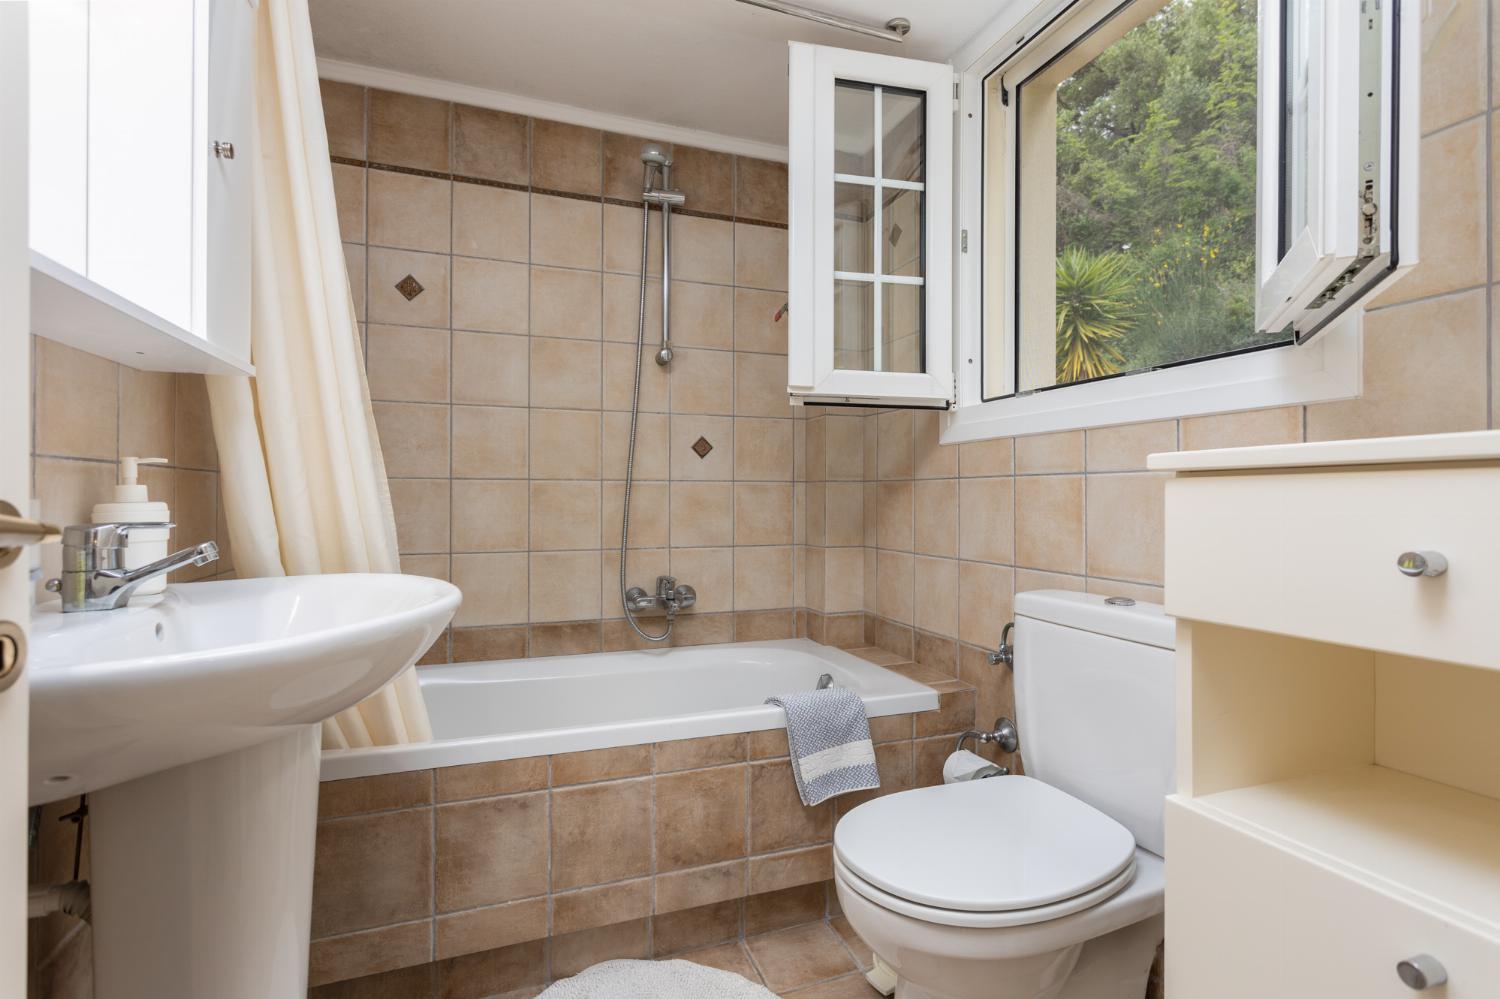 Family bathroom on second floor with bath and shower